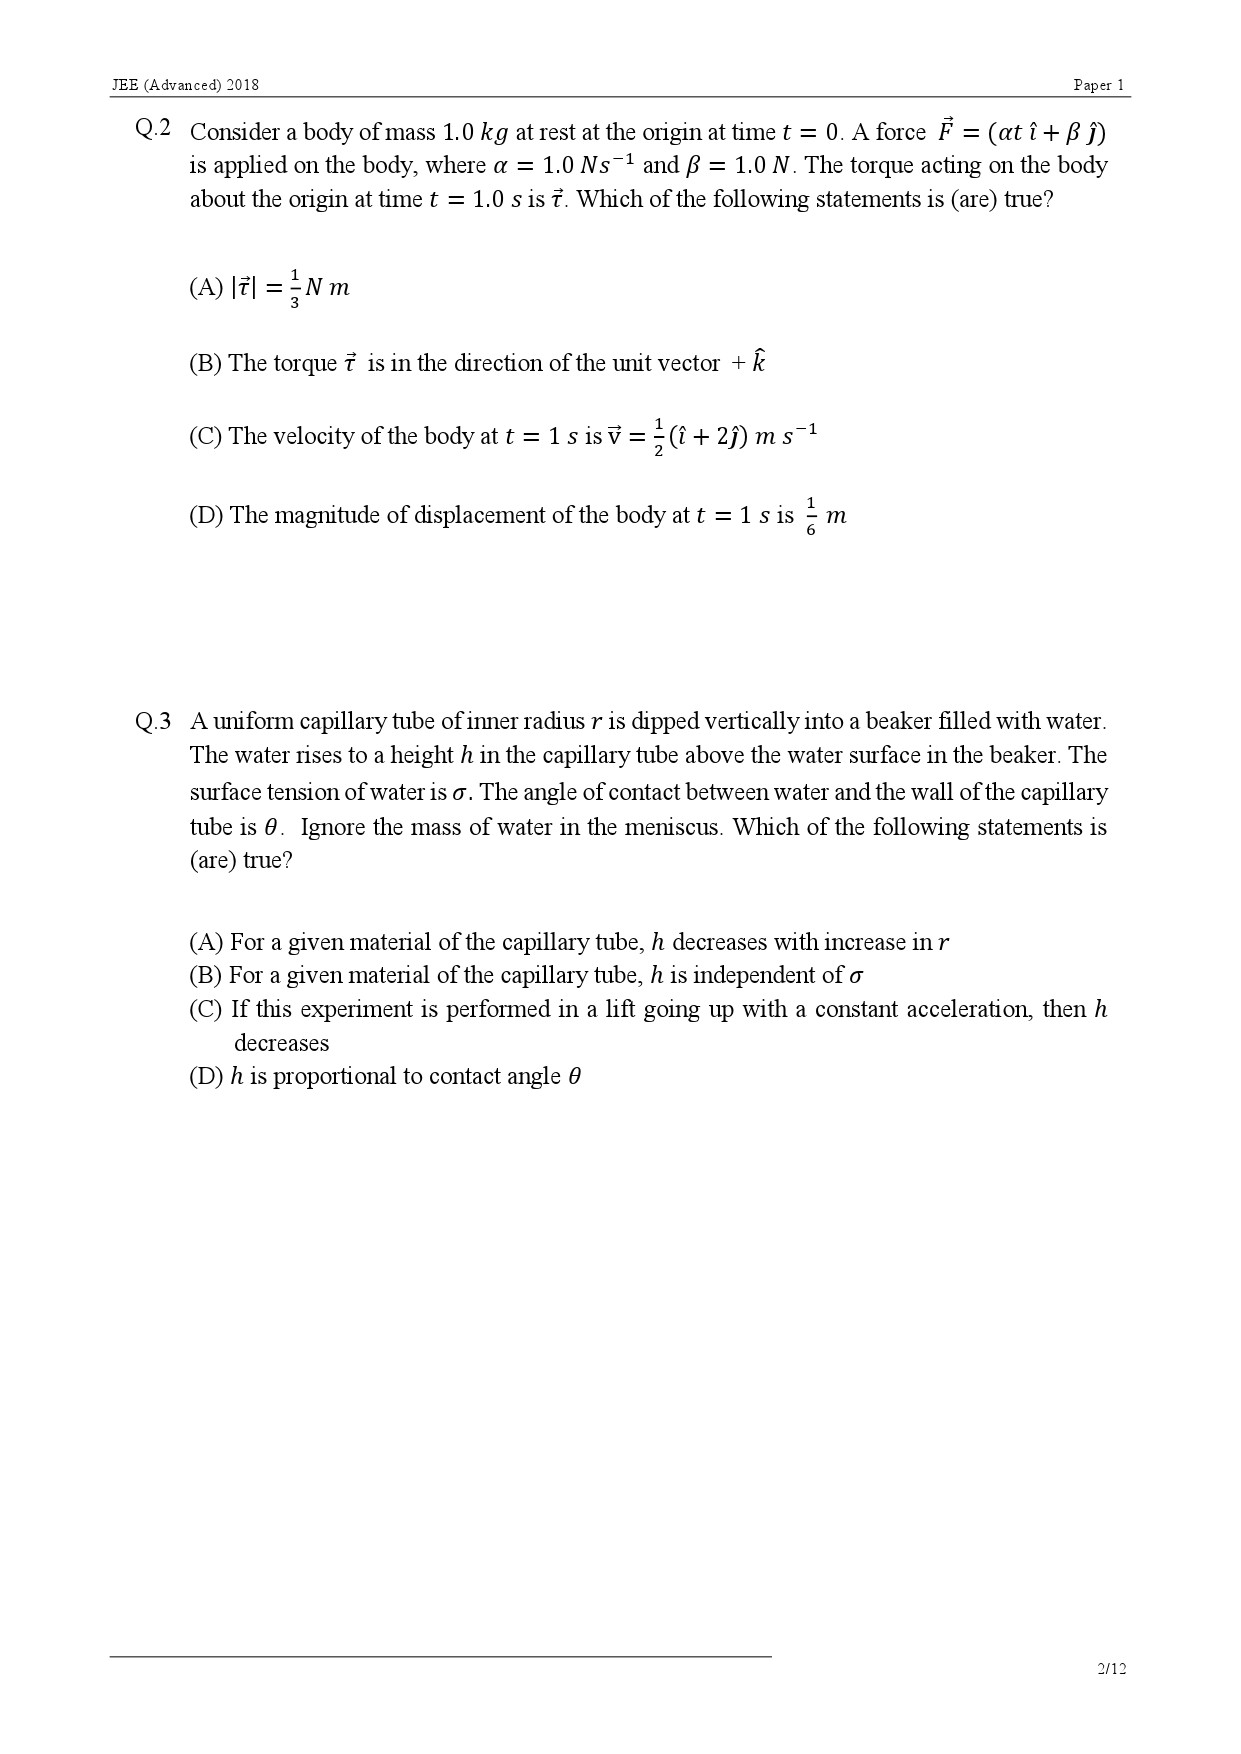 JEE Advanced Exam Question Paper 2018 Paper 1 Physics 2